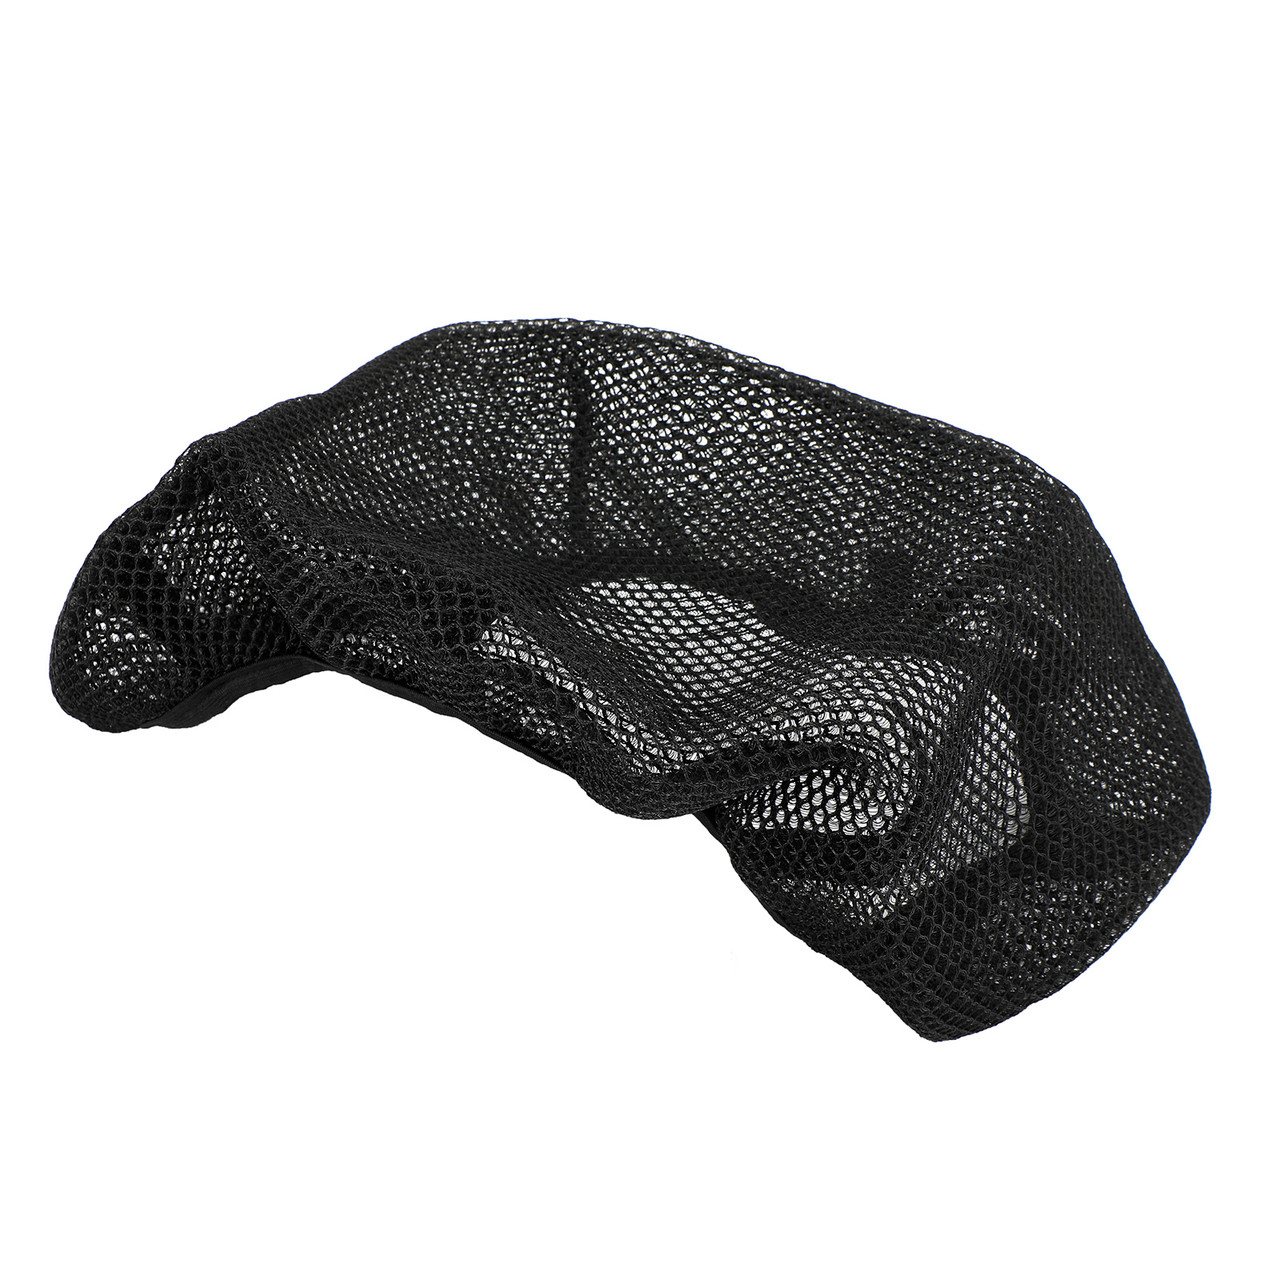 Heat-Resistant Net Seat Mesh Cover Universal L For Motorcycle Scooter Motorbike